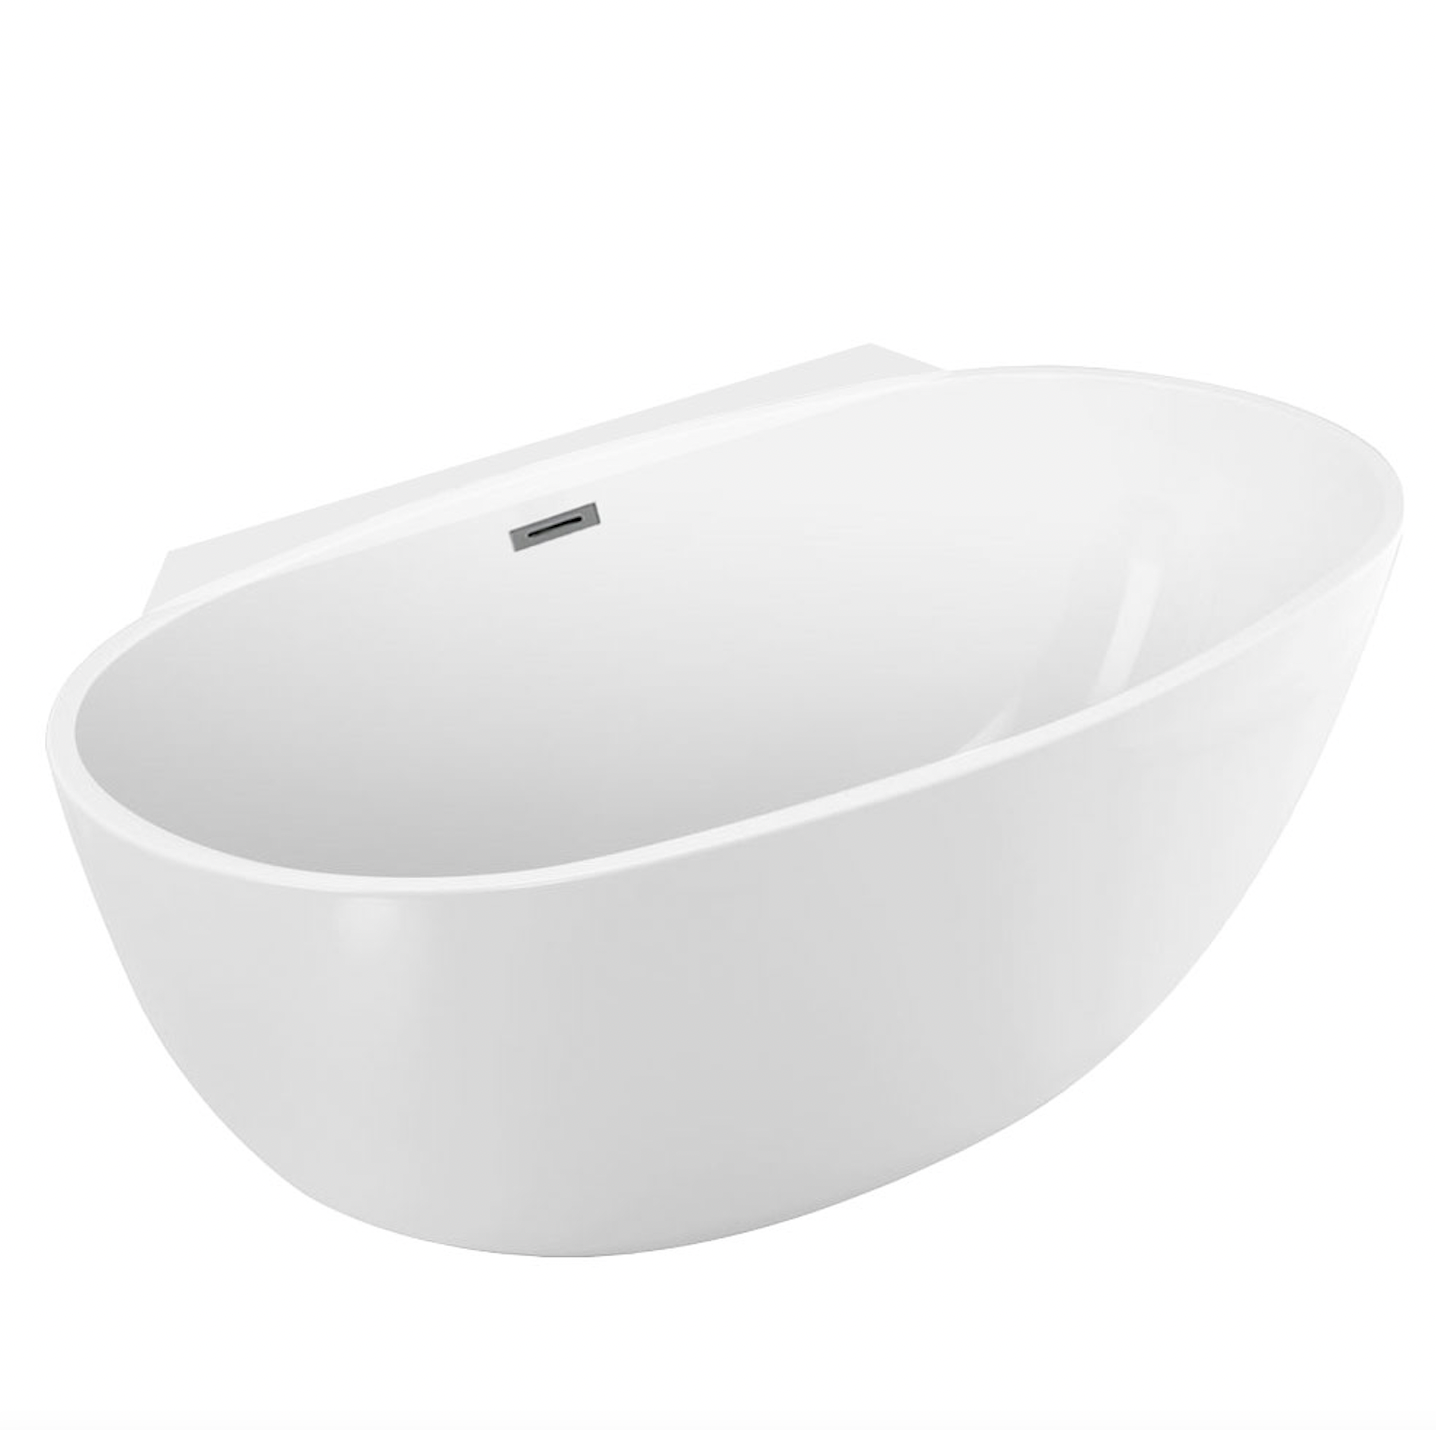 65" Acrylic Center Drain Oval Double Ended Flat bottom Freestanding Bathtub in Glossy White